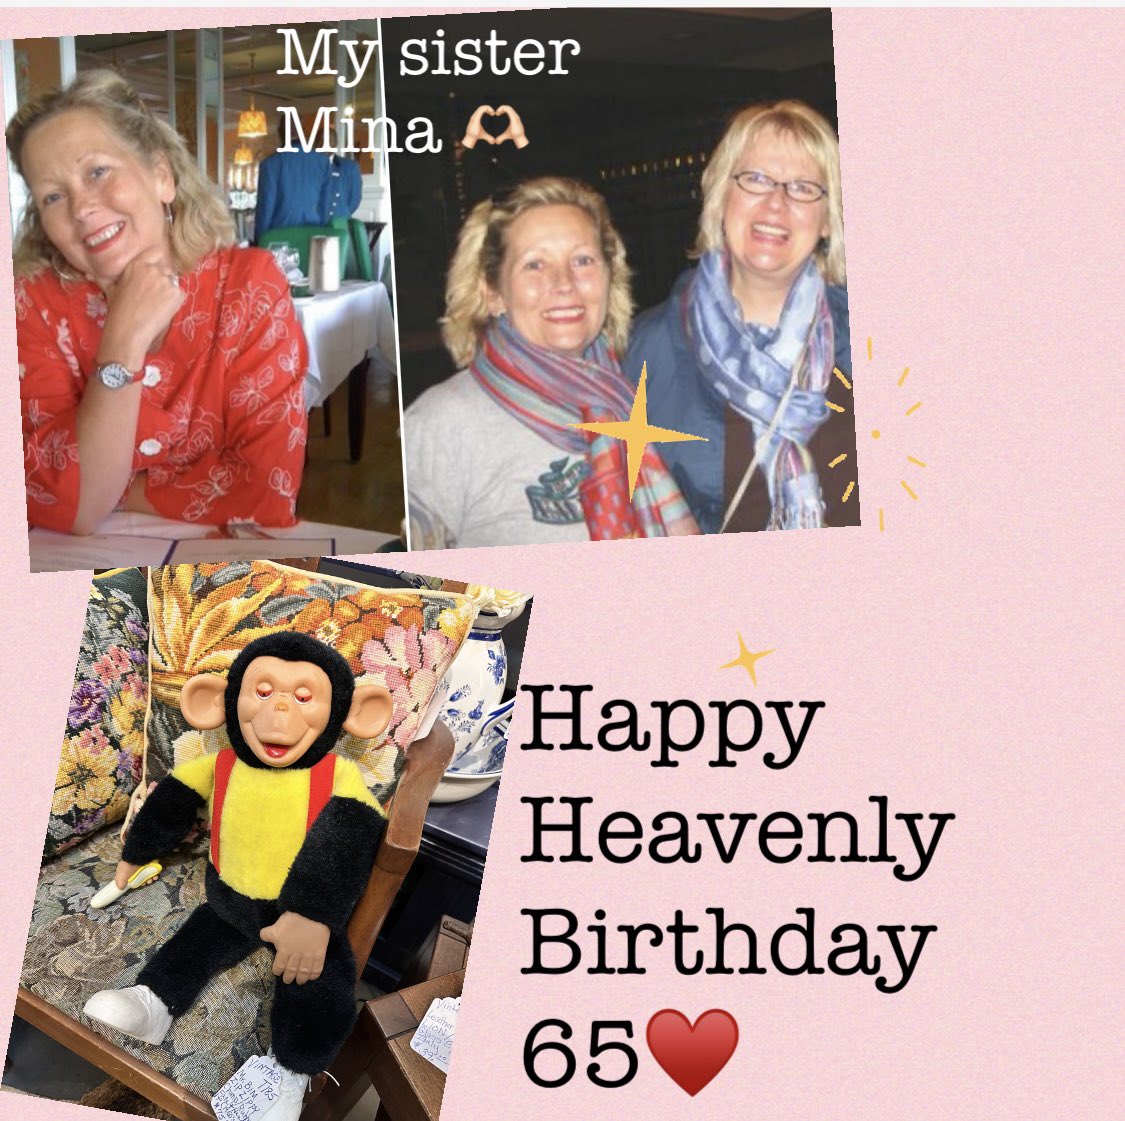 She was my person-my little sister -but I know 65 means nothing in Heaven-she’s having a wonderful time -she sends me winks like seeing this monkey she loved at the antique store…Happy Heavenly Birthday to my sister❤️#sister #heavenlybirthday #beingethelauthor